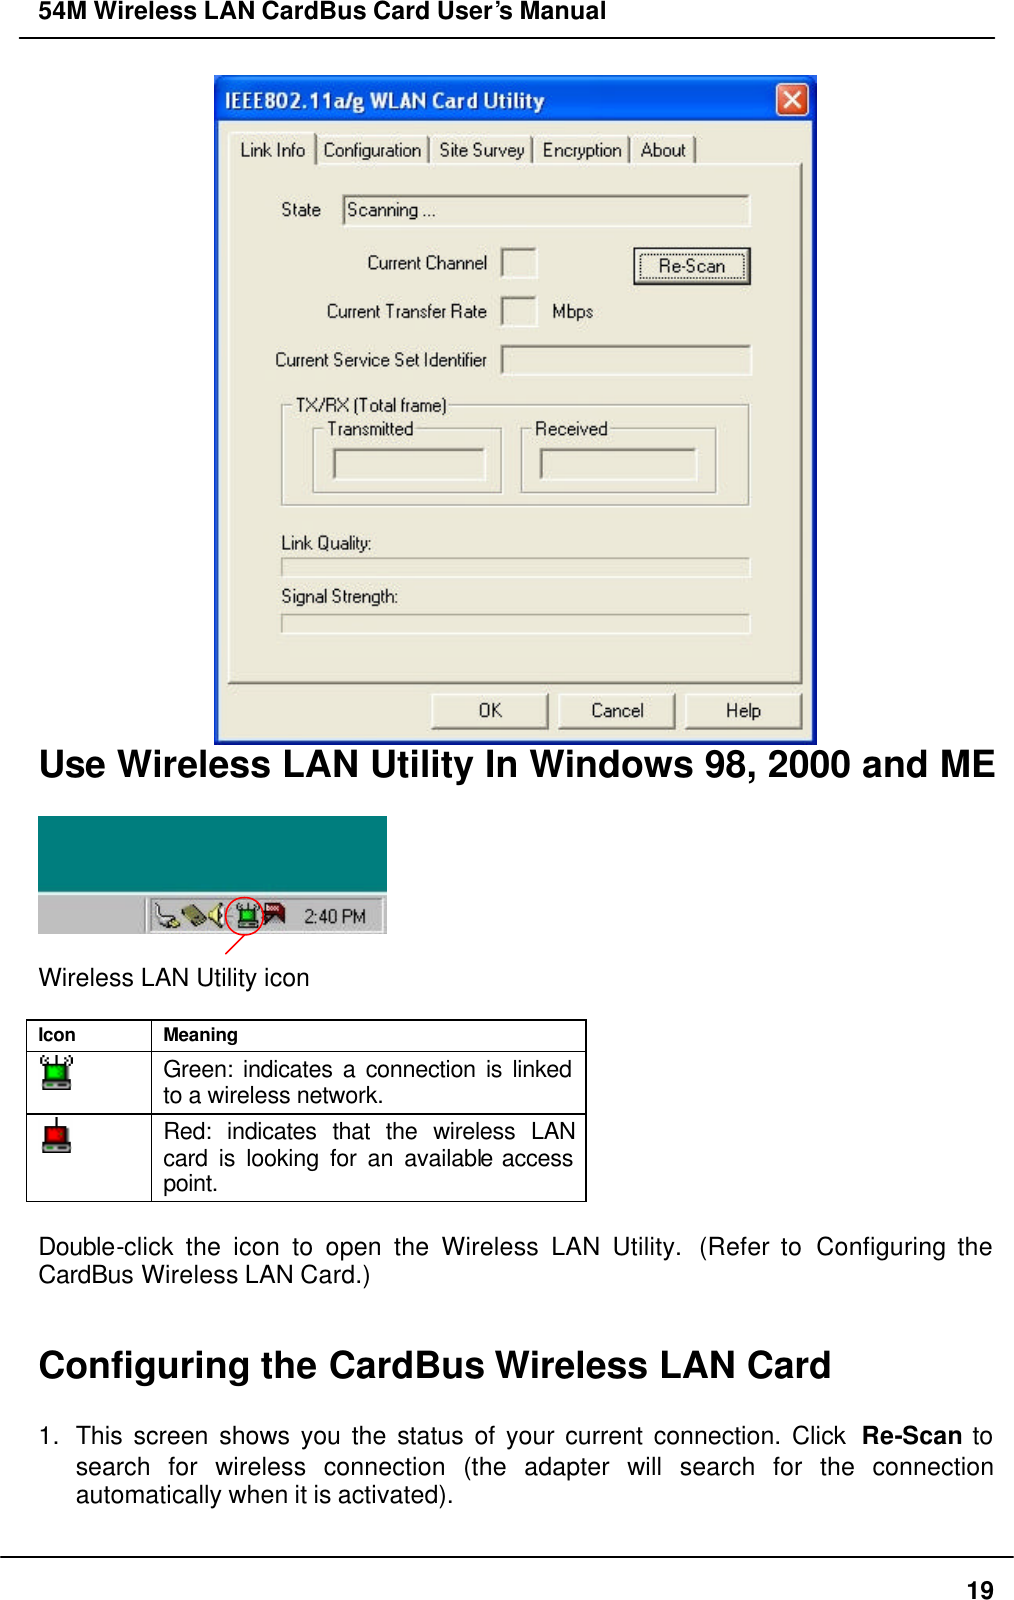 54M Wireless LAN CardBus Card User’s Manual  19  Use Wireless LAN Utility In Windows 98, 2000 and ME    Wireless LAN Utility icon  Icon Meaning  Green: indicates a connection is linked to a wireless network.  Red: indicates that the wireless LAN card is looking for an available access point.  Double-click the icon to open the Wireless LAN Utility.  (Refer to Configuring the CardBus Wireless LAN Card.)   Configuring the CardBus Wireless LAN Card    1. This screen shows you the status of your current connection. Click  Re-Scan to search for wireless connection (the adapter will search for the connection automatically when it is activated).    